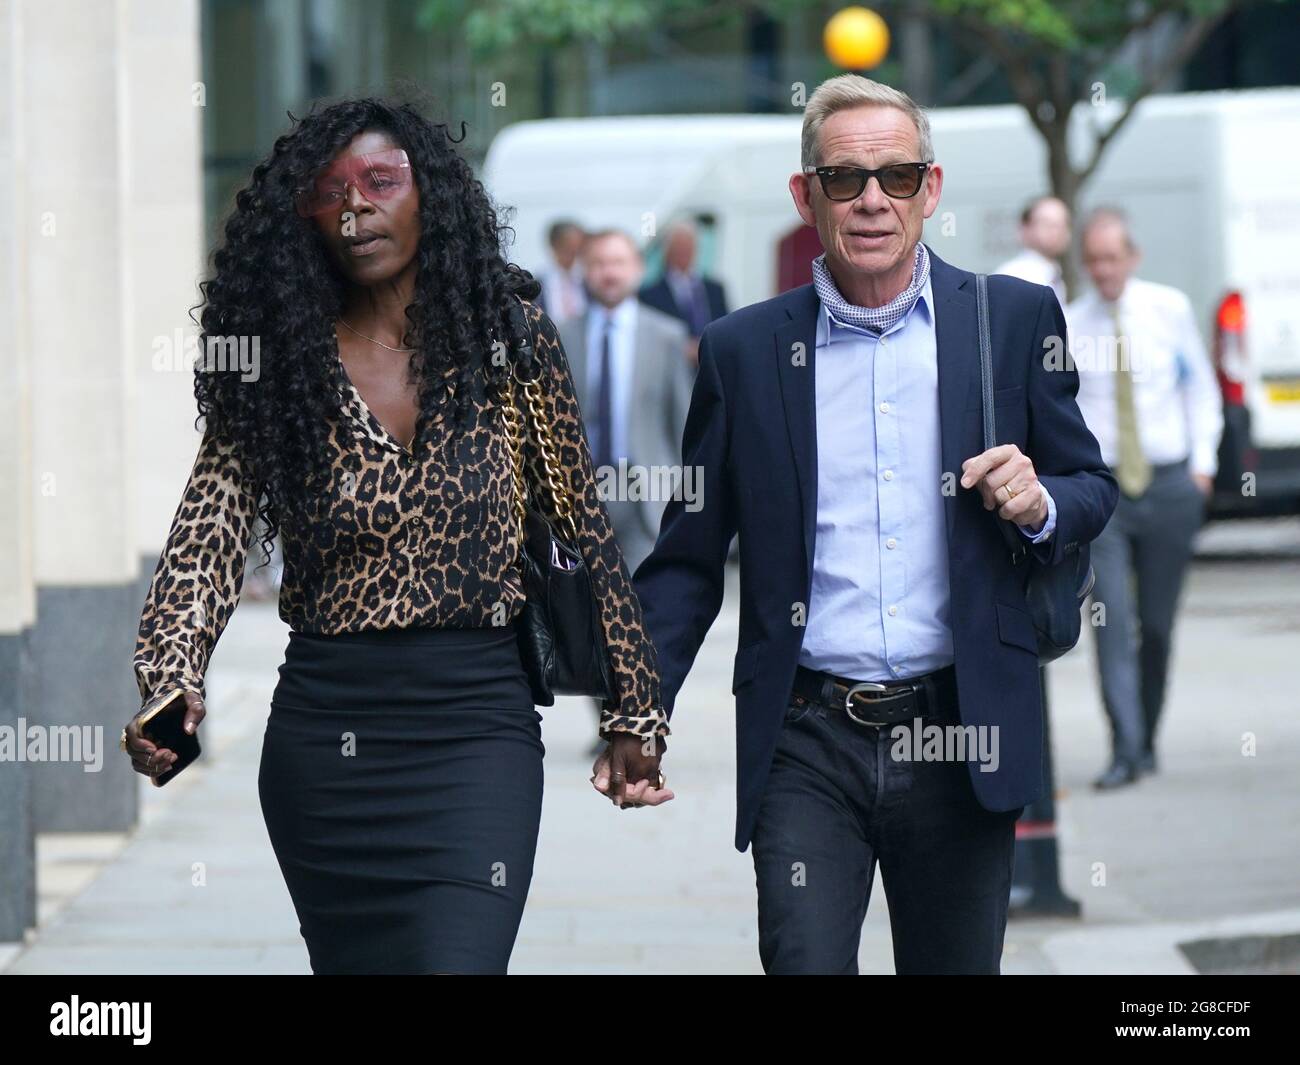 Paul Cook with his wife Jeni arriving at the Rolls Building at the Hight Court, London, for a hearing between two former Sex Pistols band members and the frontman over the pic